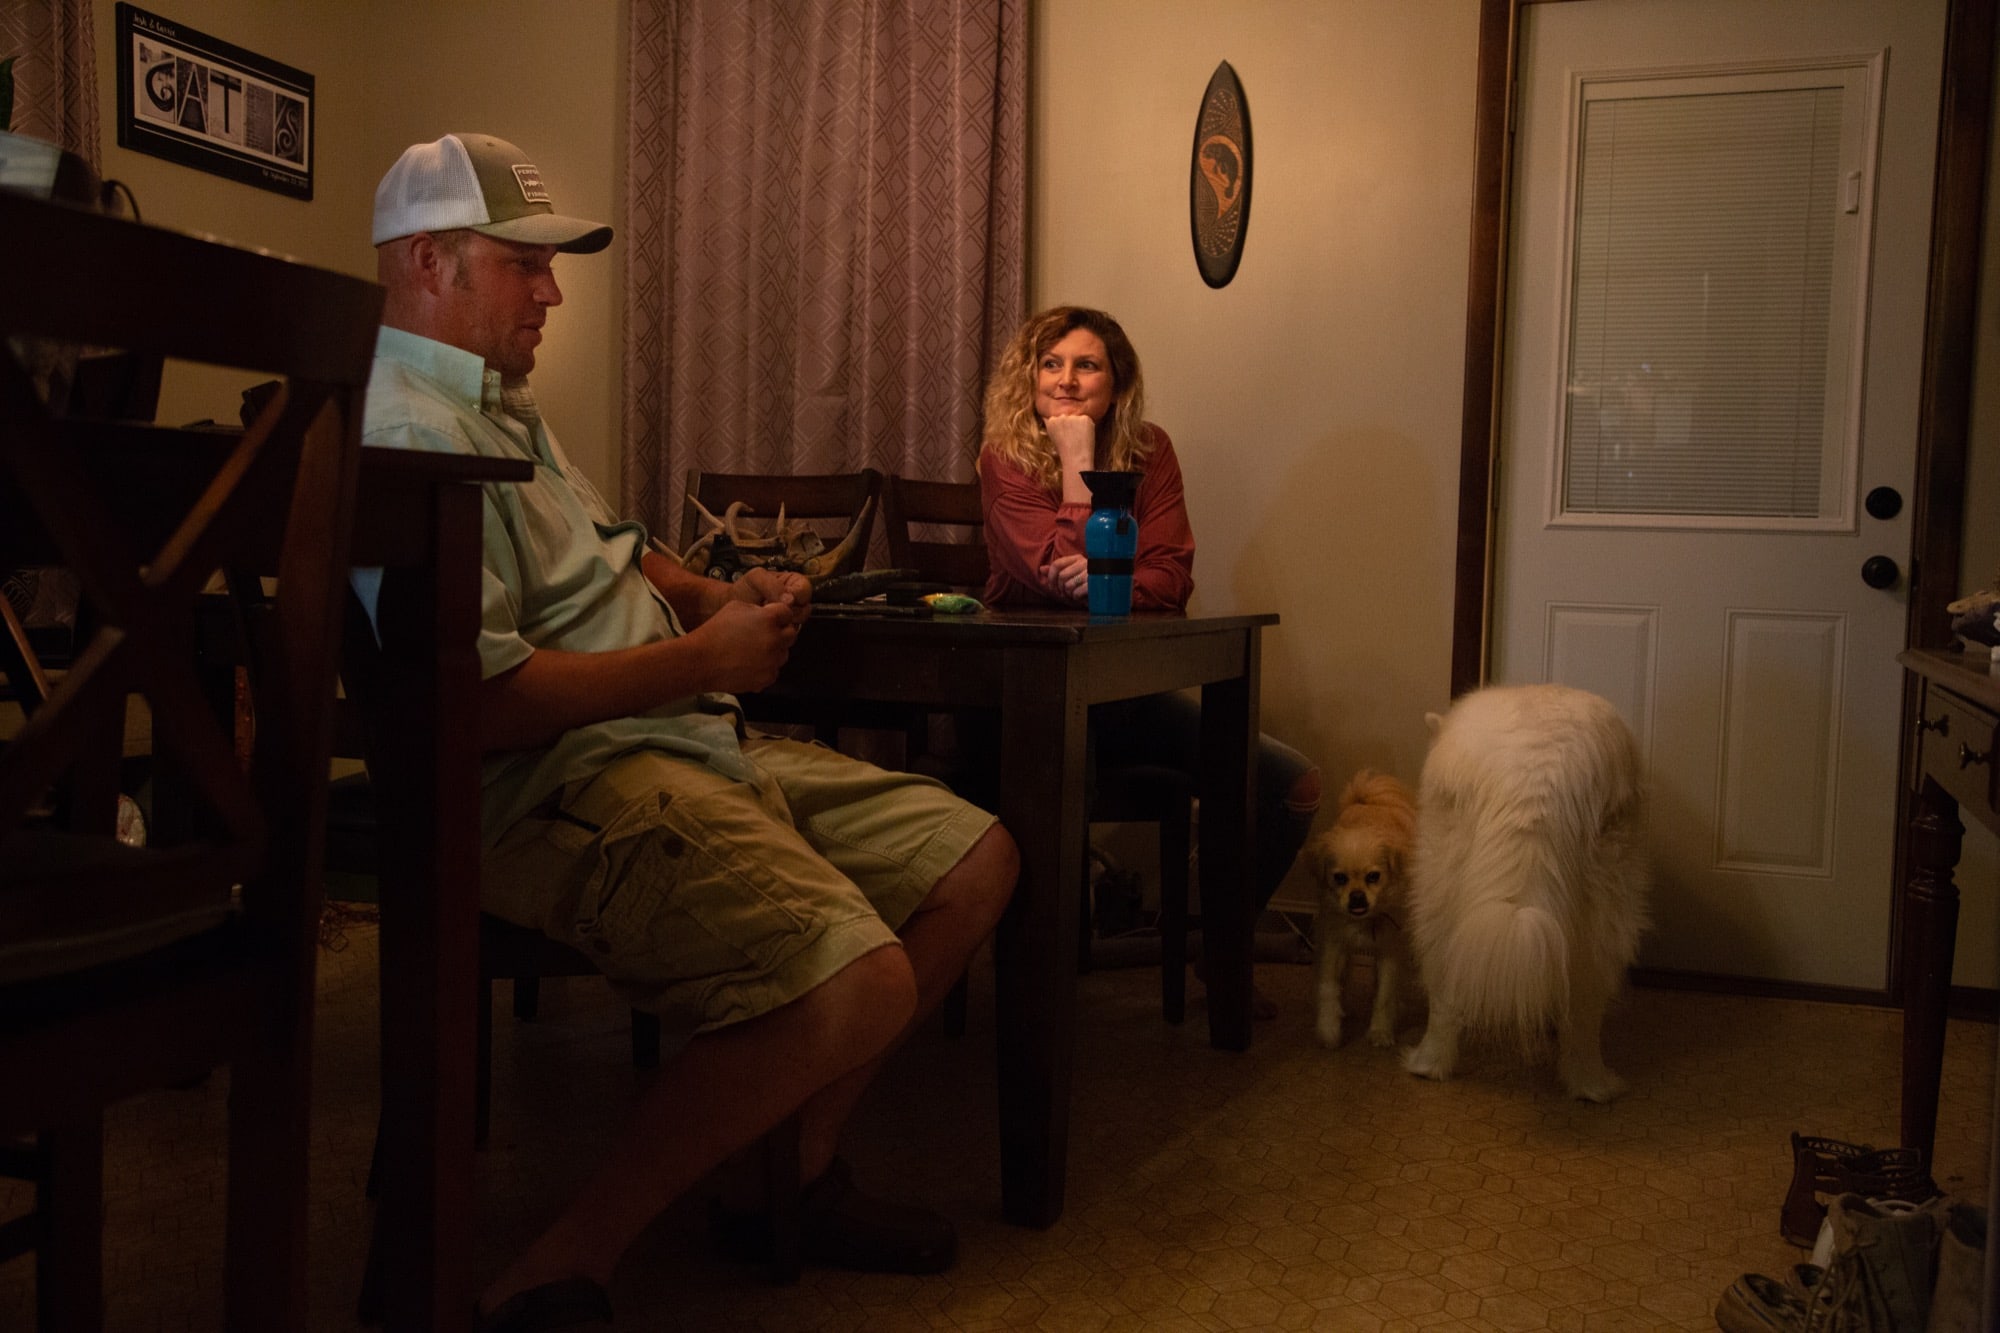 Josh and Carrie Gates have gotten counseling for the emotional trauma they suffered five years ago, when a tornado pulled Carrie from their apartment in Platteville, Wisconsin, leaving her severely injured. Carrie said she was diagnosed with PTSD in June. (Allie Barton/News21)